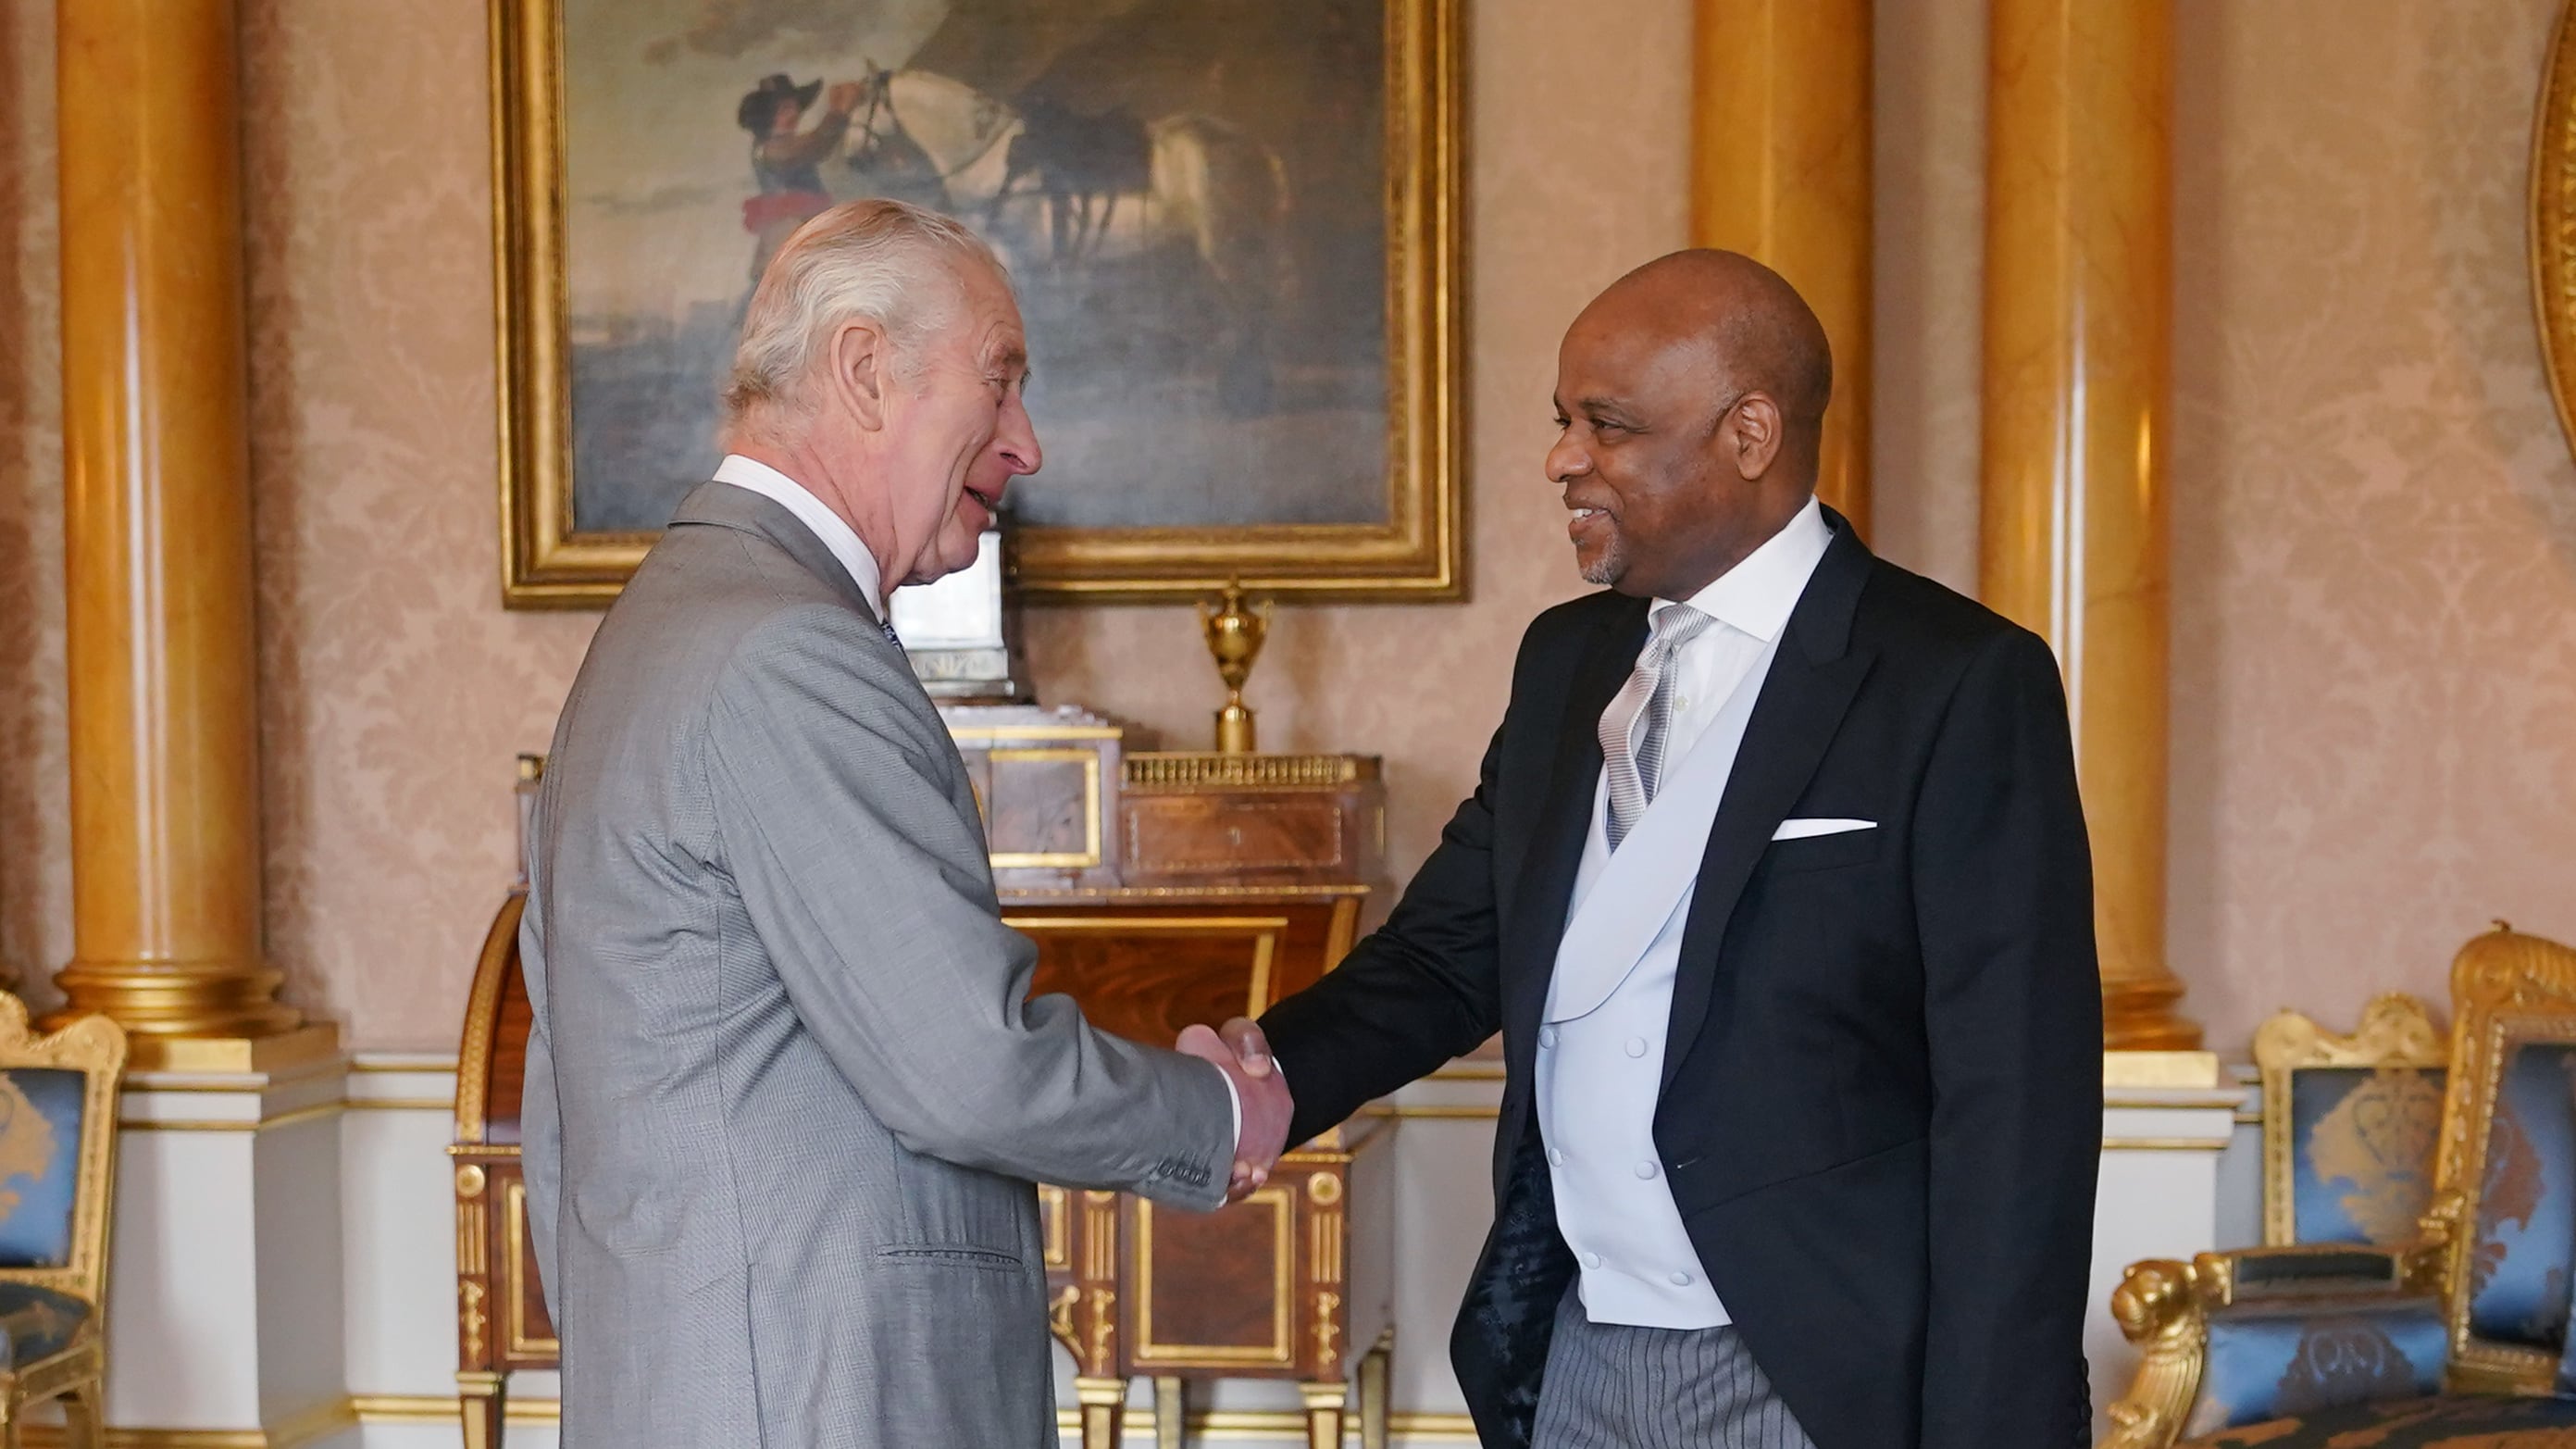 The King held an audience with Alexander Williams, the High Commissioner of Jamaica, at Buckingham Palace